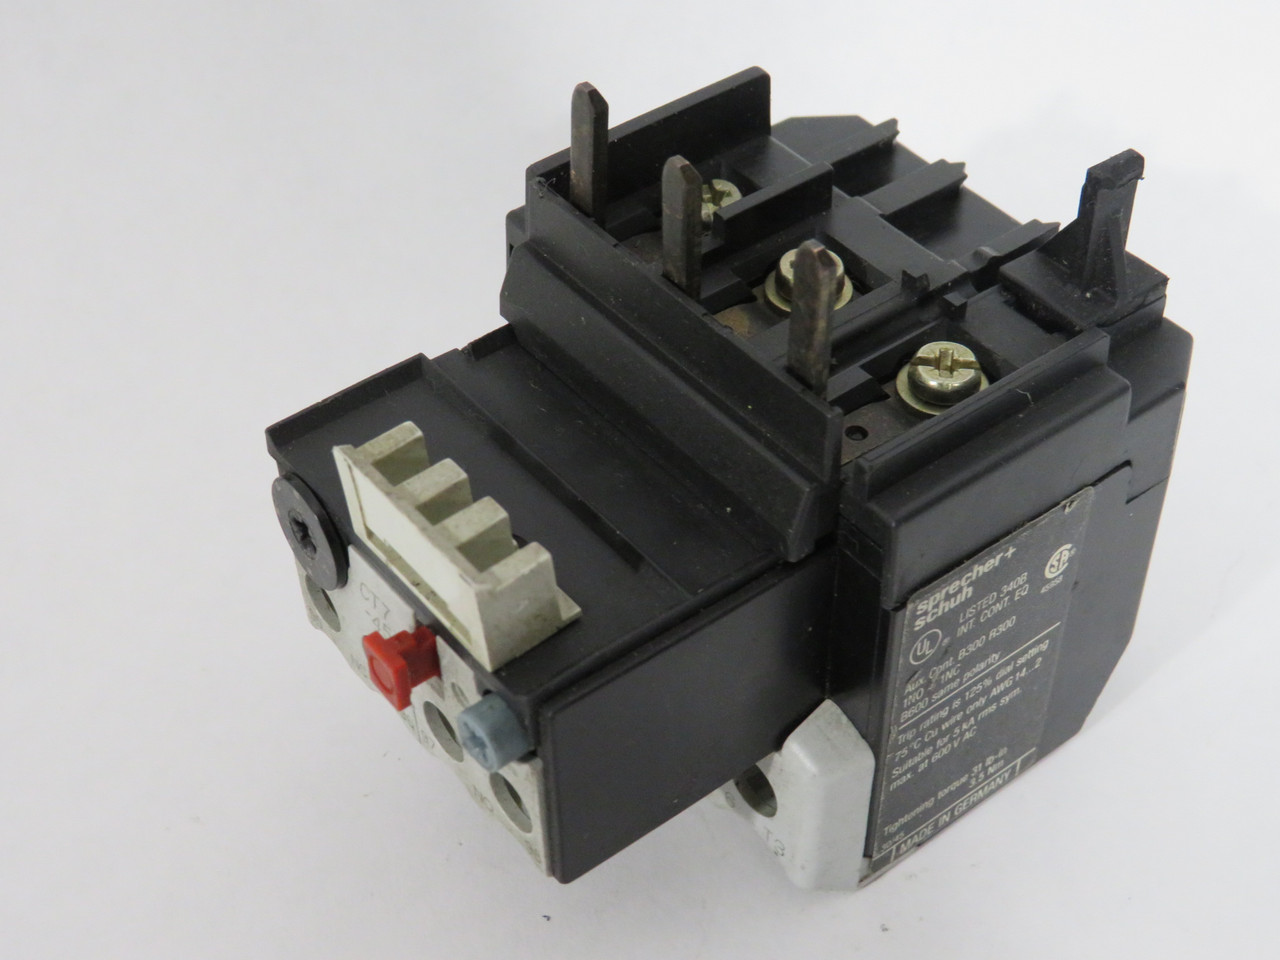 Sprecher + Schuh CT7-45-30 Overload Relay 18-30Amp 1NO 1NC USED